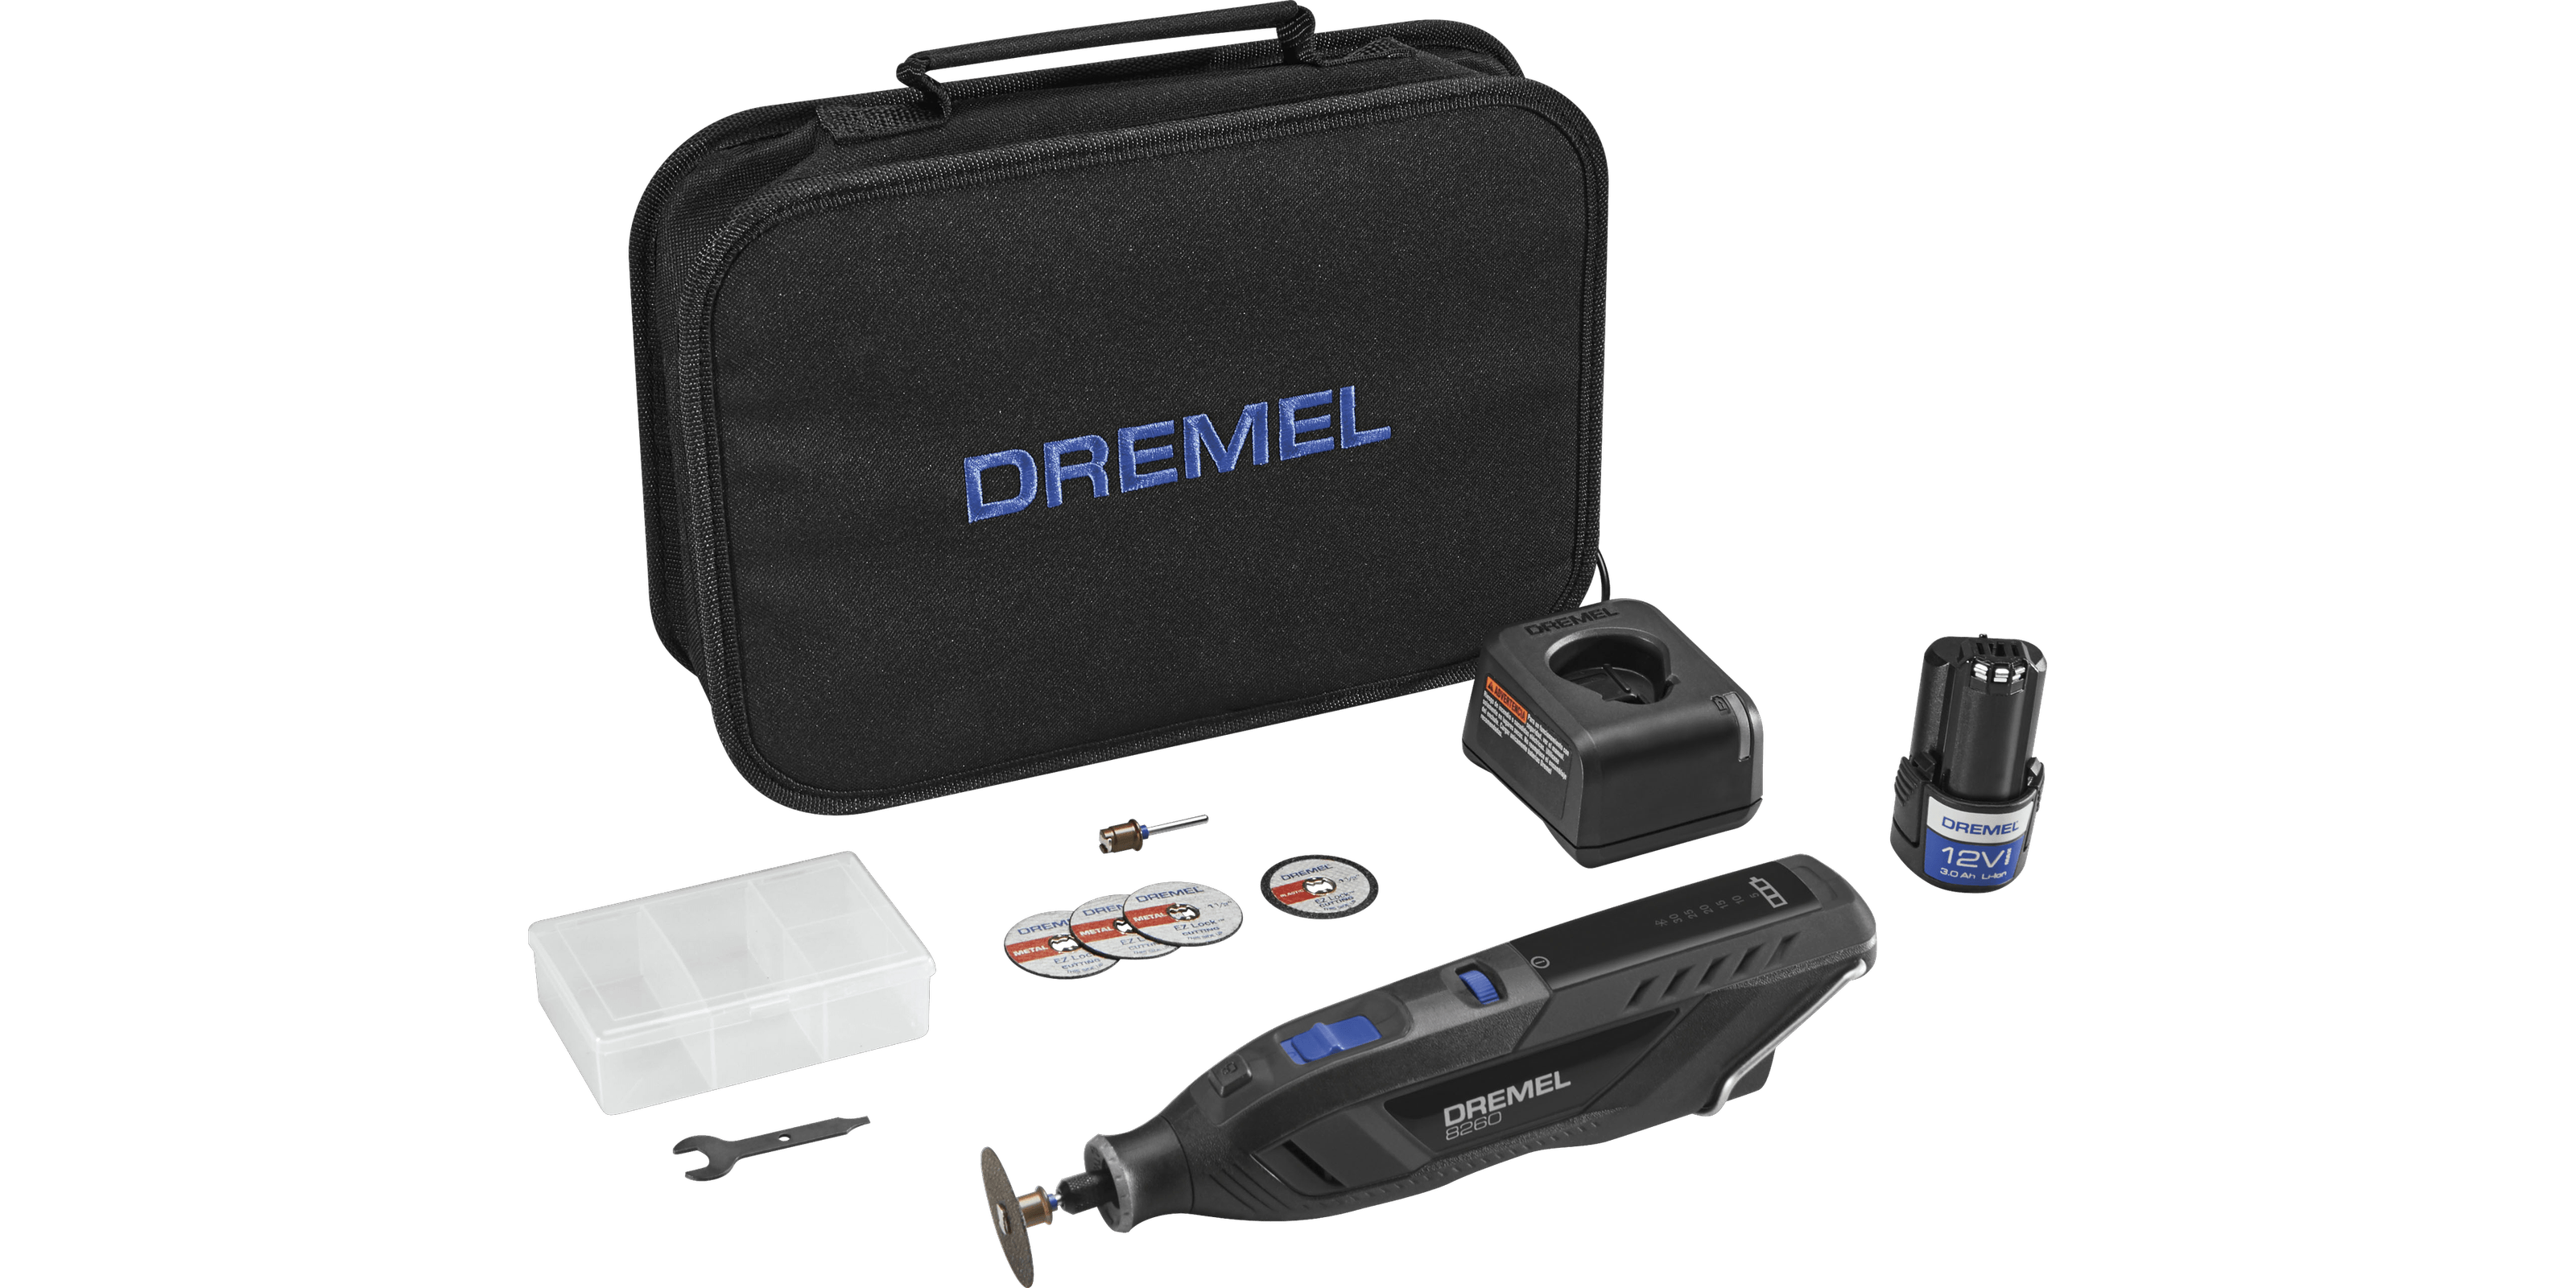 Dremel 8240 12V Quiet Cordless Rotary Tool with All-Purpose